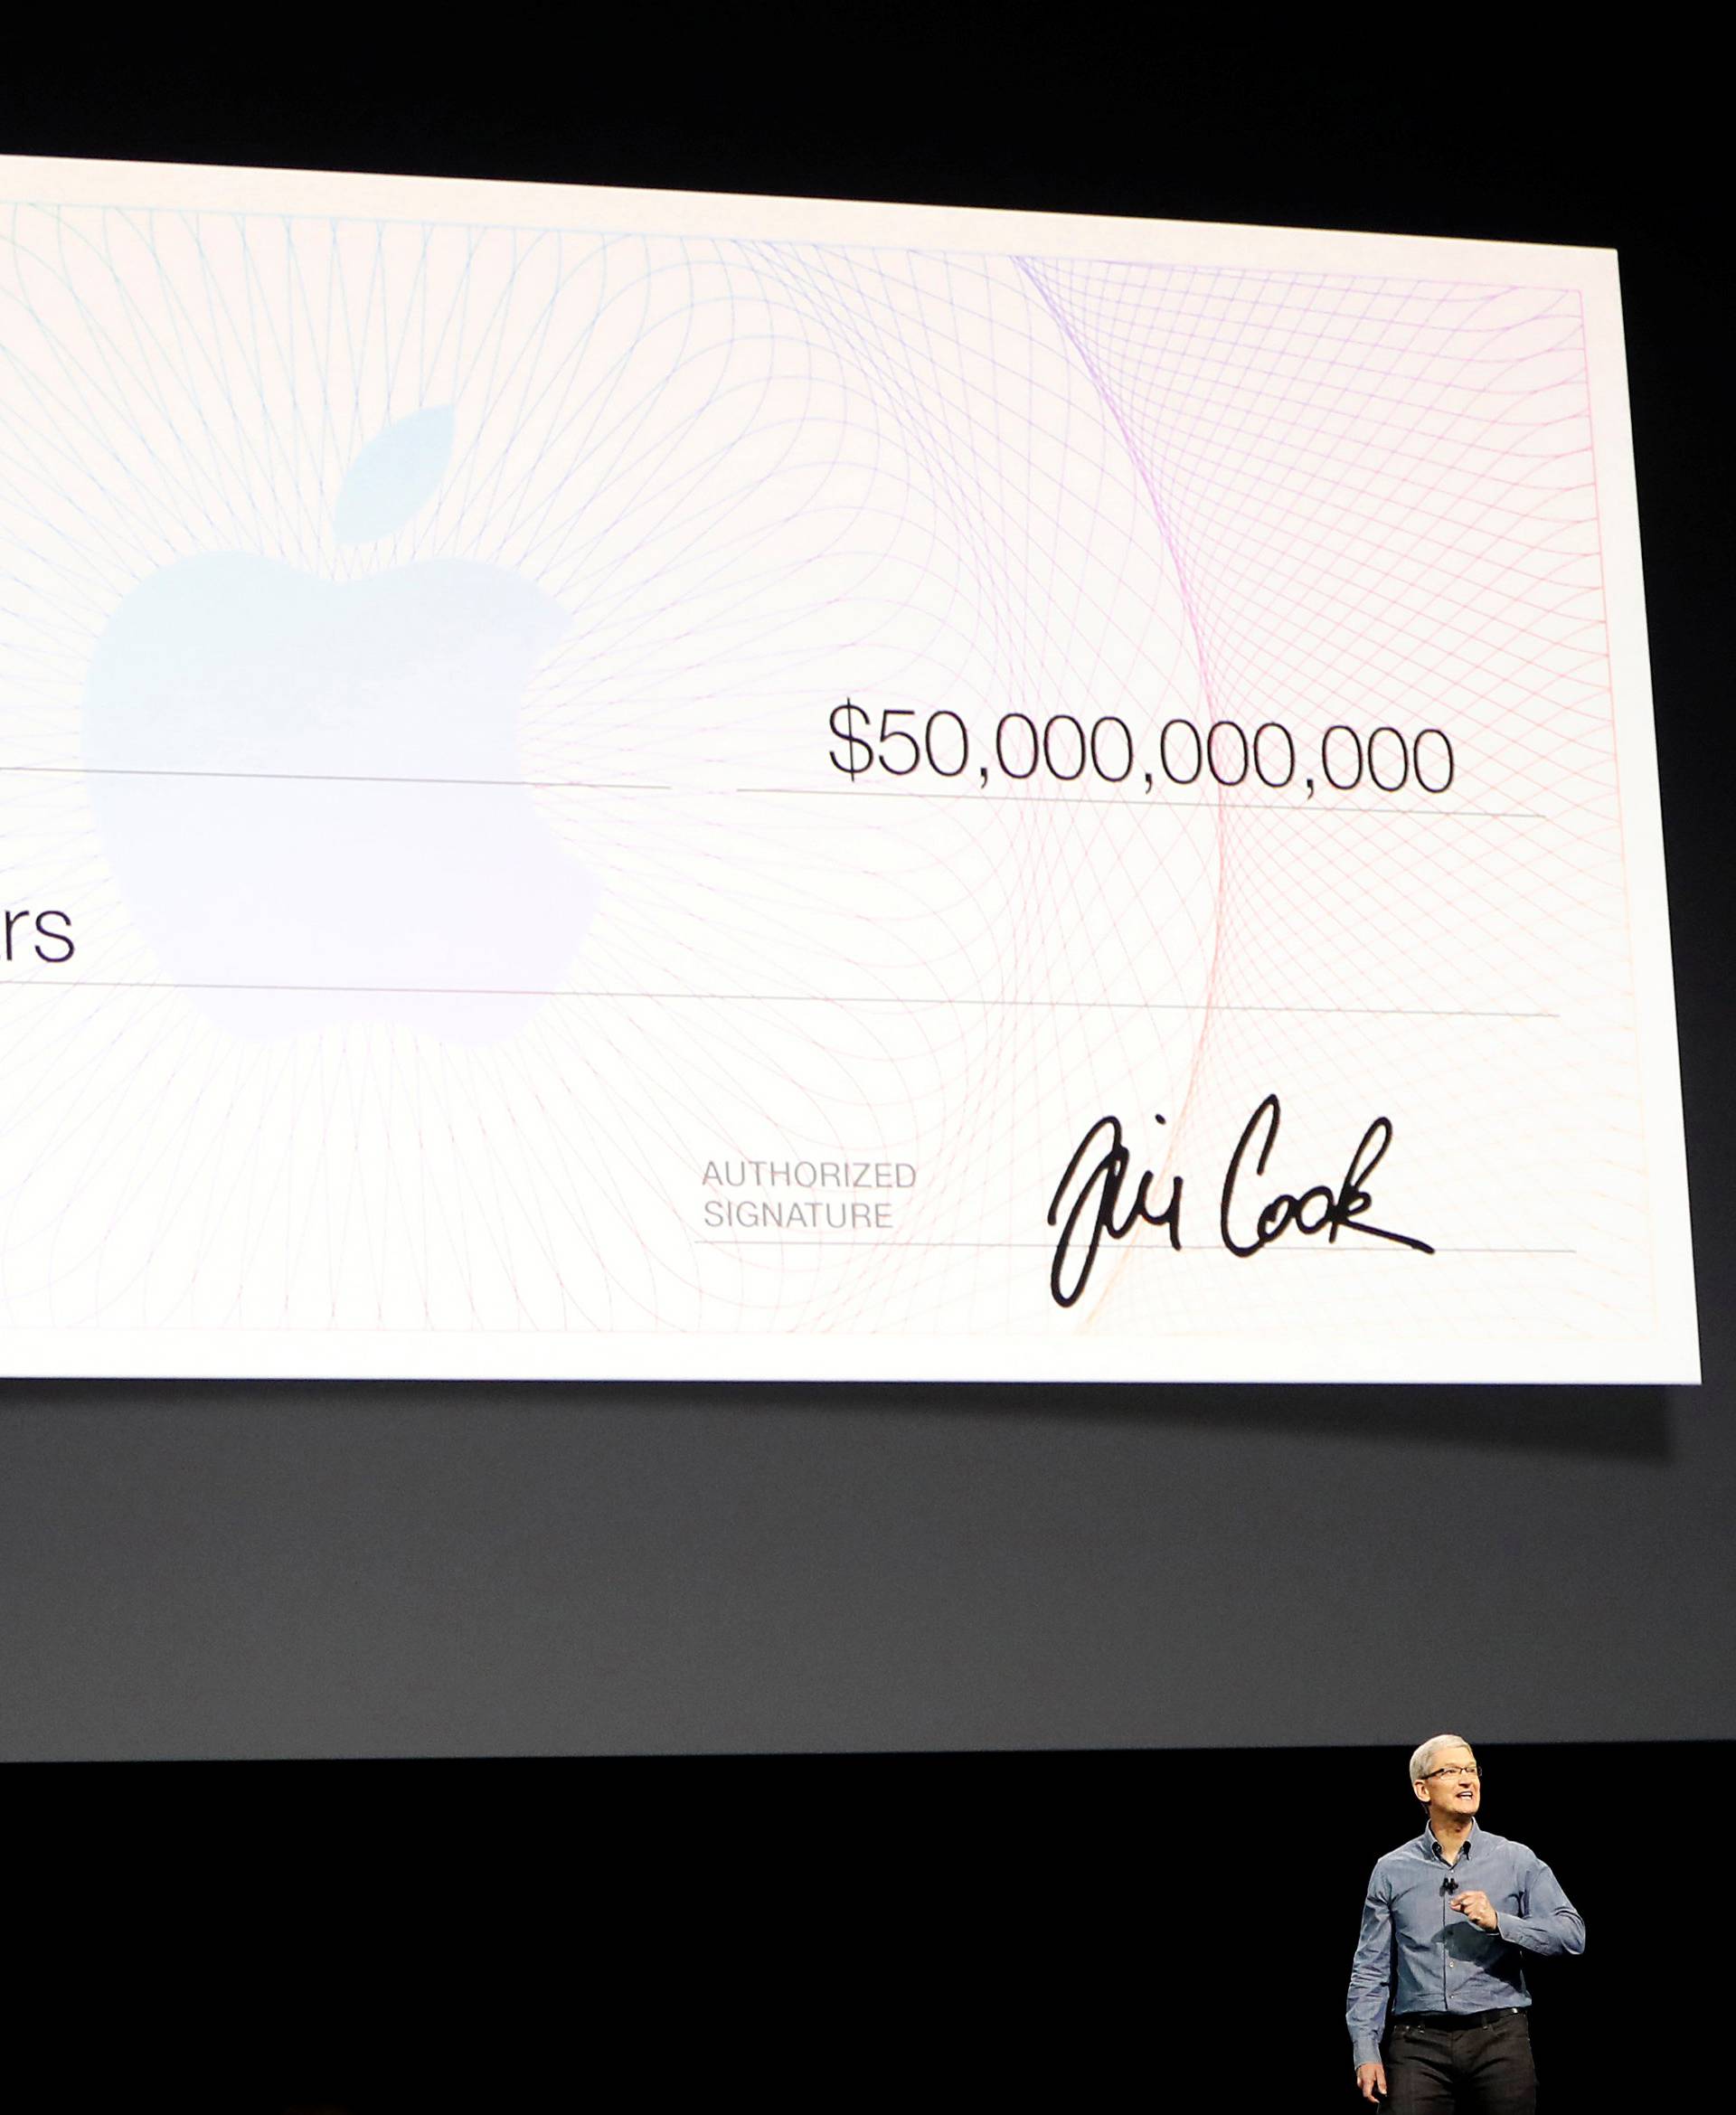 Apple Inc. CEO Tim Cook speaks about monies paid to app developers at the company's World Wide Developers Conference in San Francisco, California